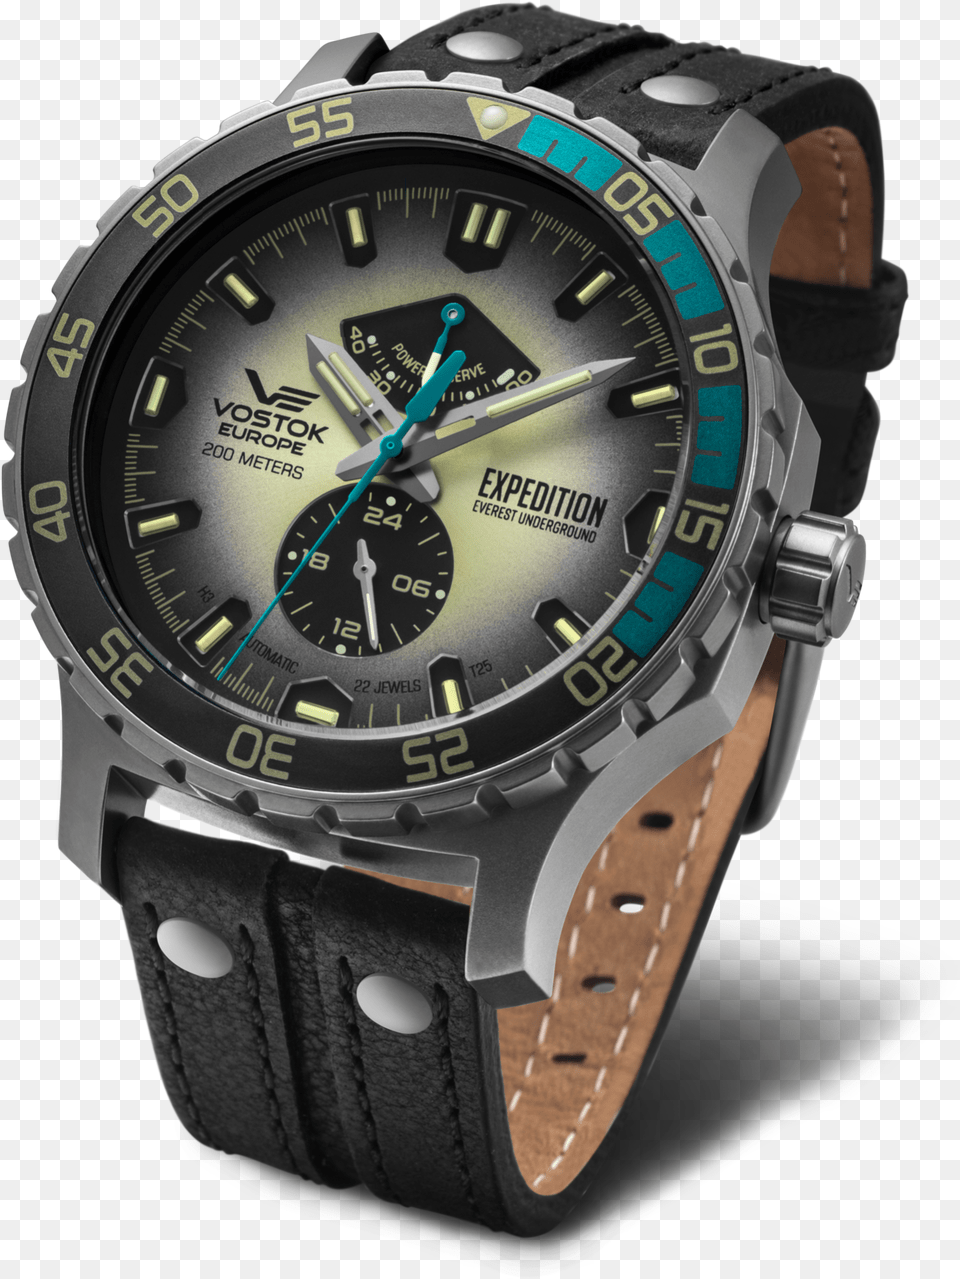 Vostok Europe Expedition Everest, Arm, Body Part, Person, Wristwatch Free Png